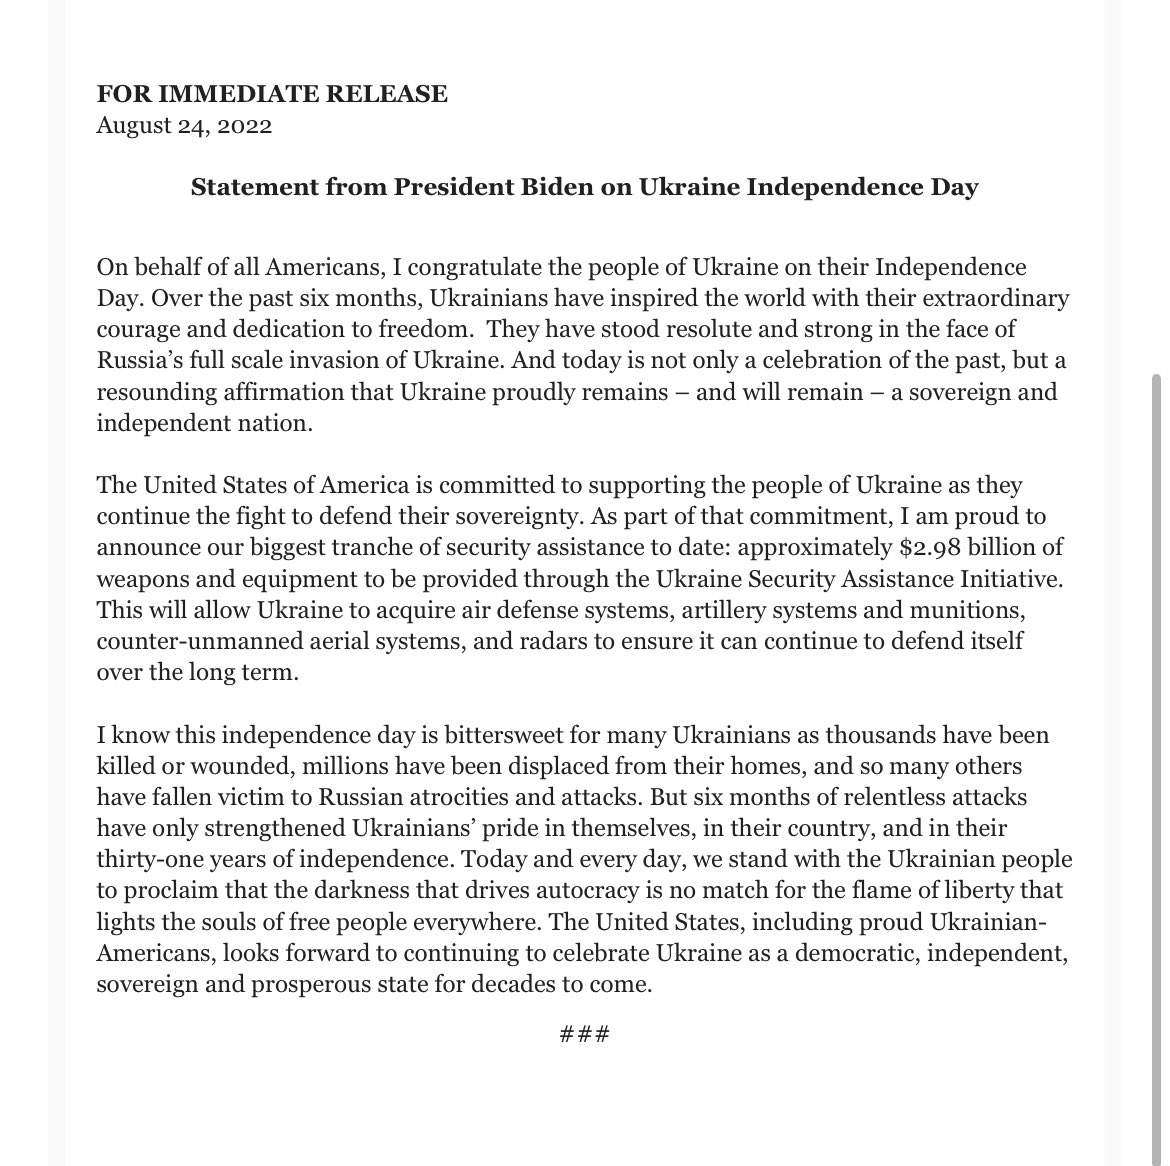 President Biden congratulates Ukraine on its Independence Day, and adds I am proud to announce our biggest tranche of security assistance to date: approximately $2.98 billion of weapons and equipment to be provided through Ukraine Security Assistance Initiative